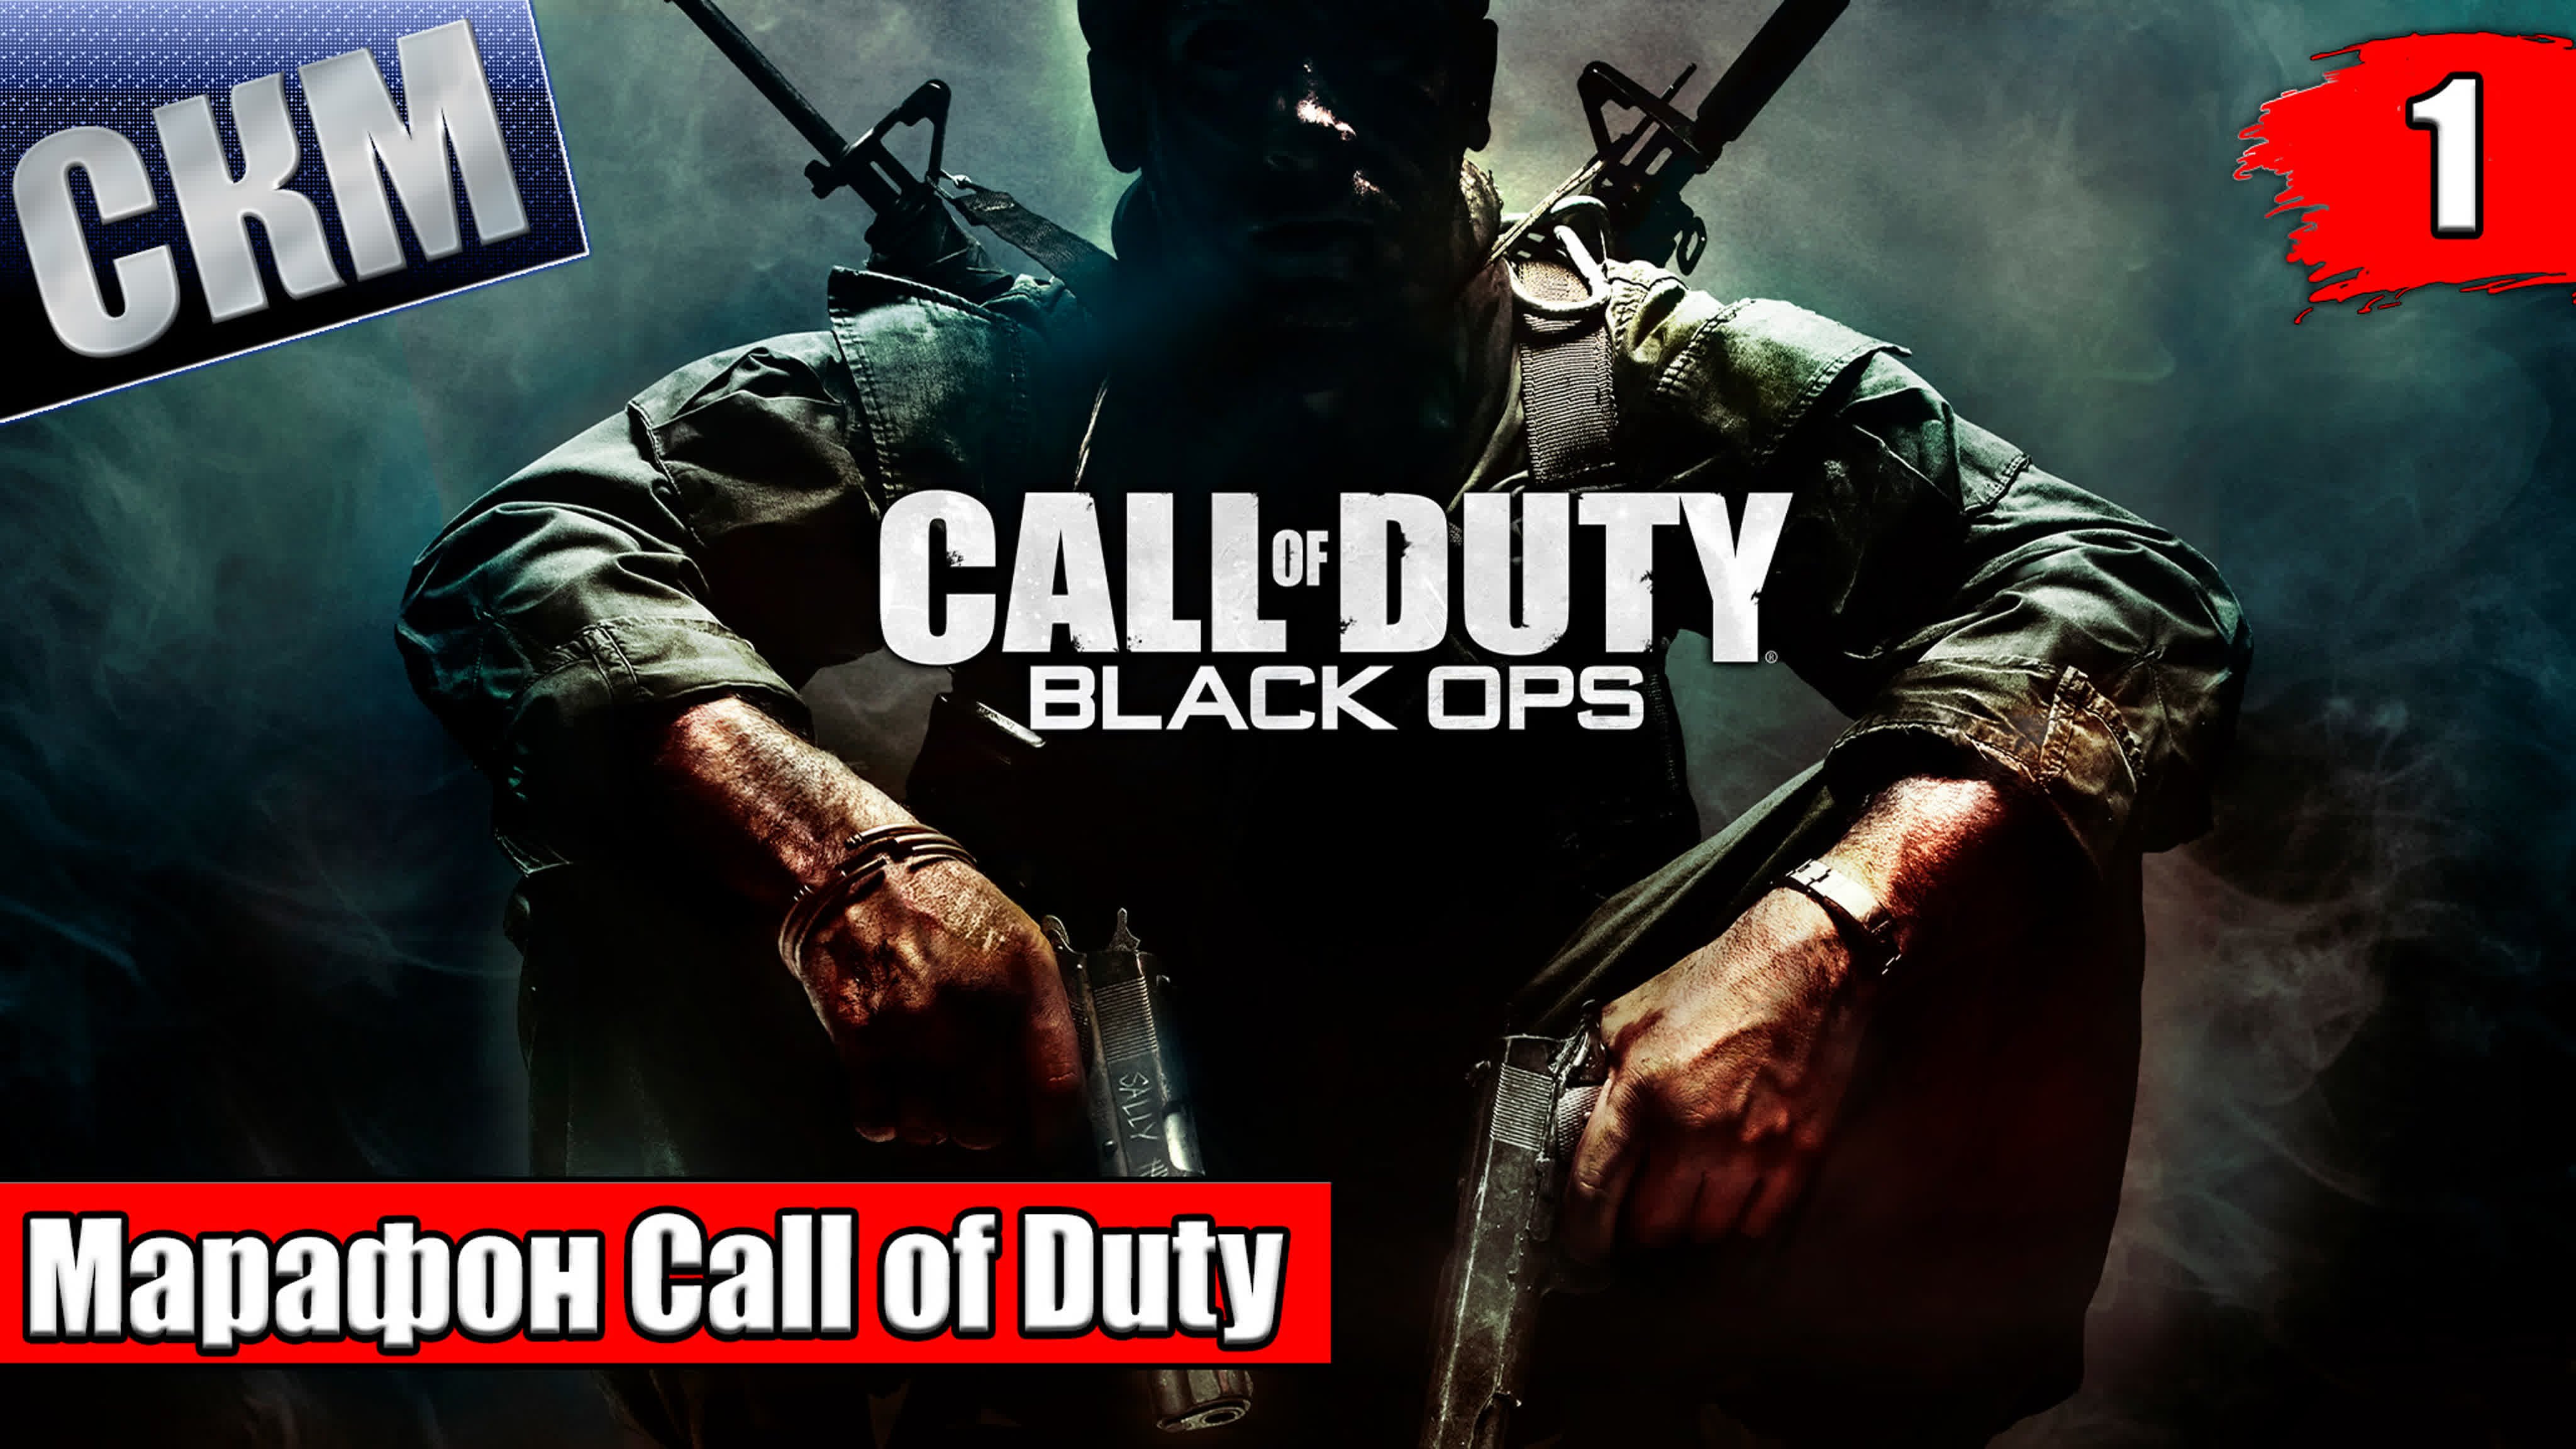 Call of Duty Black Ops 2 (PC)